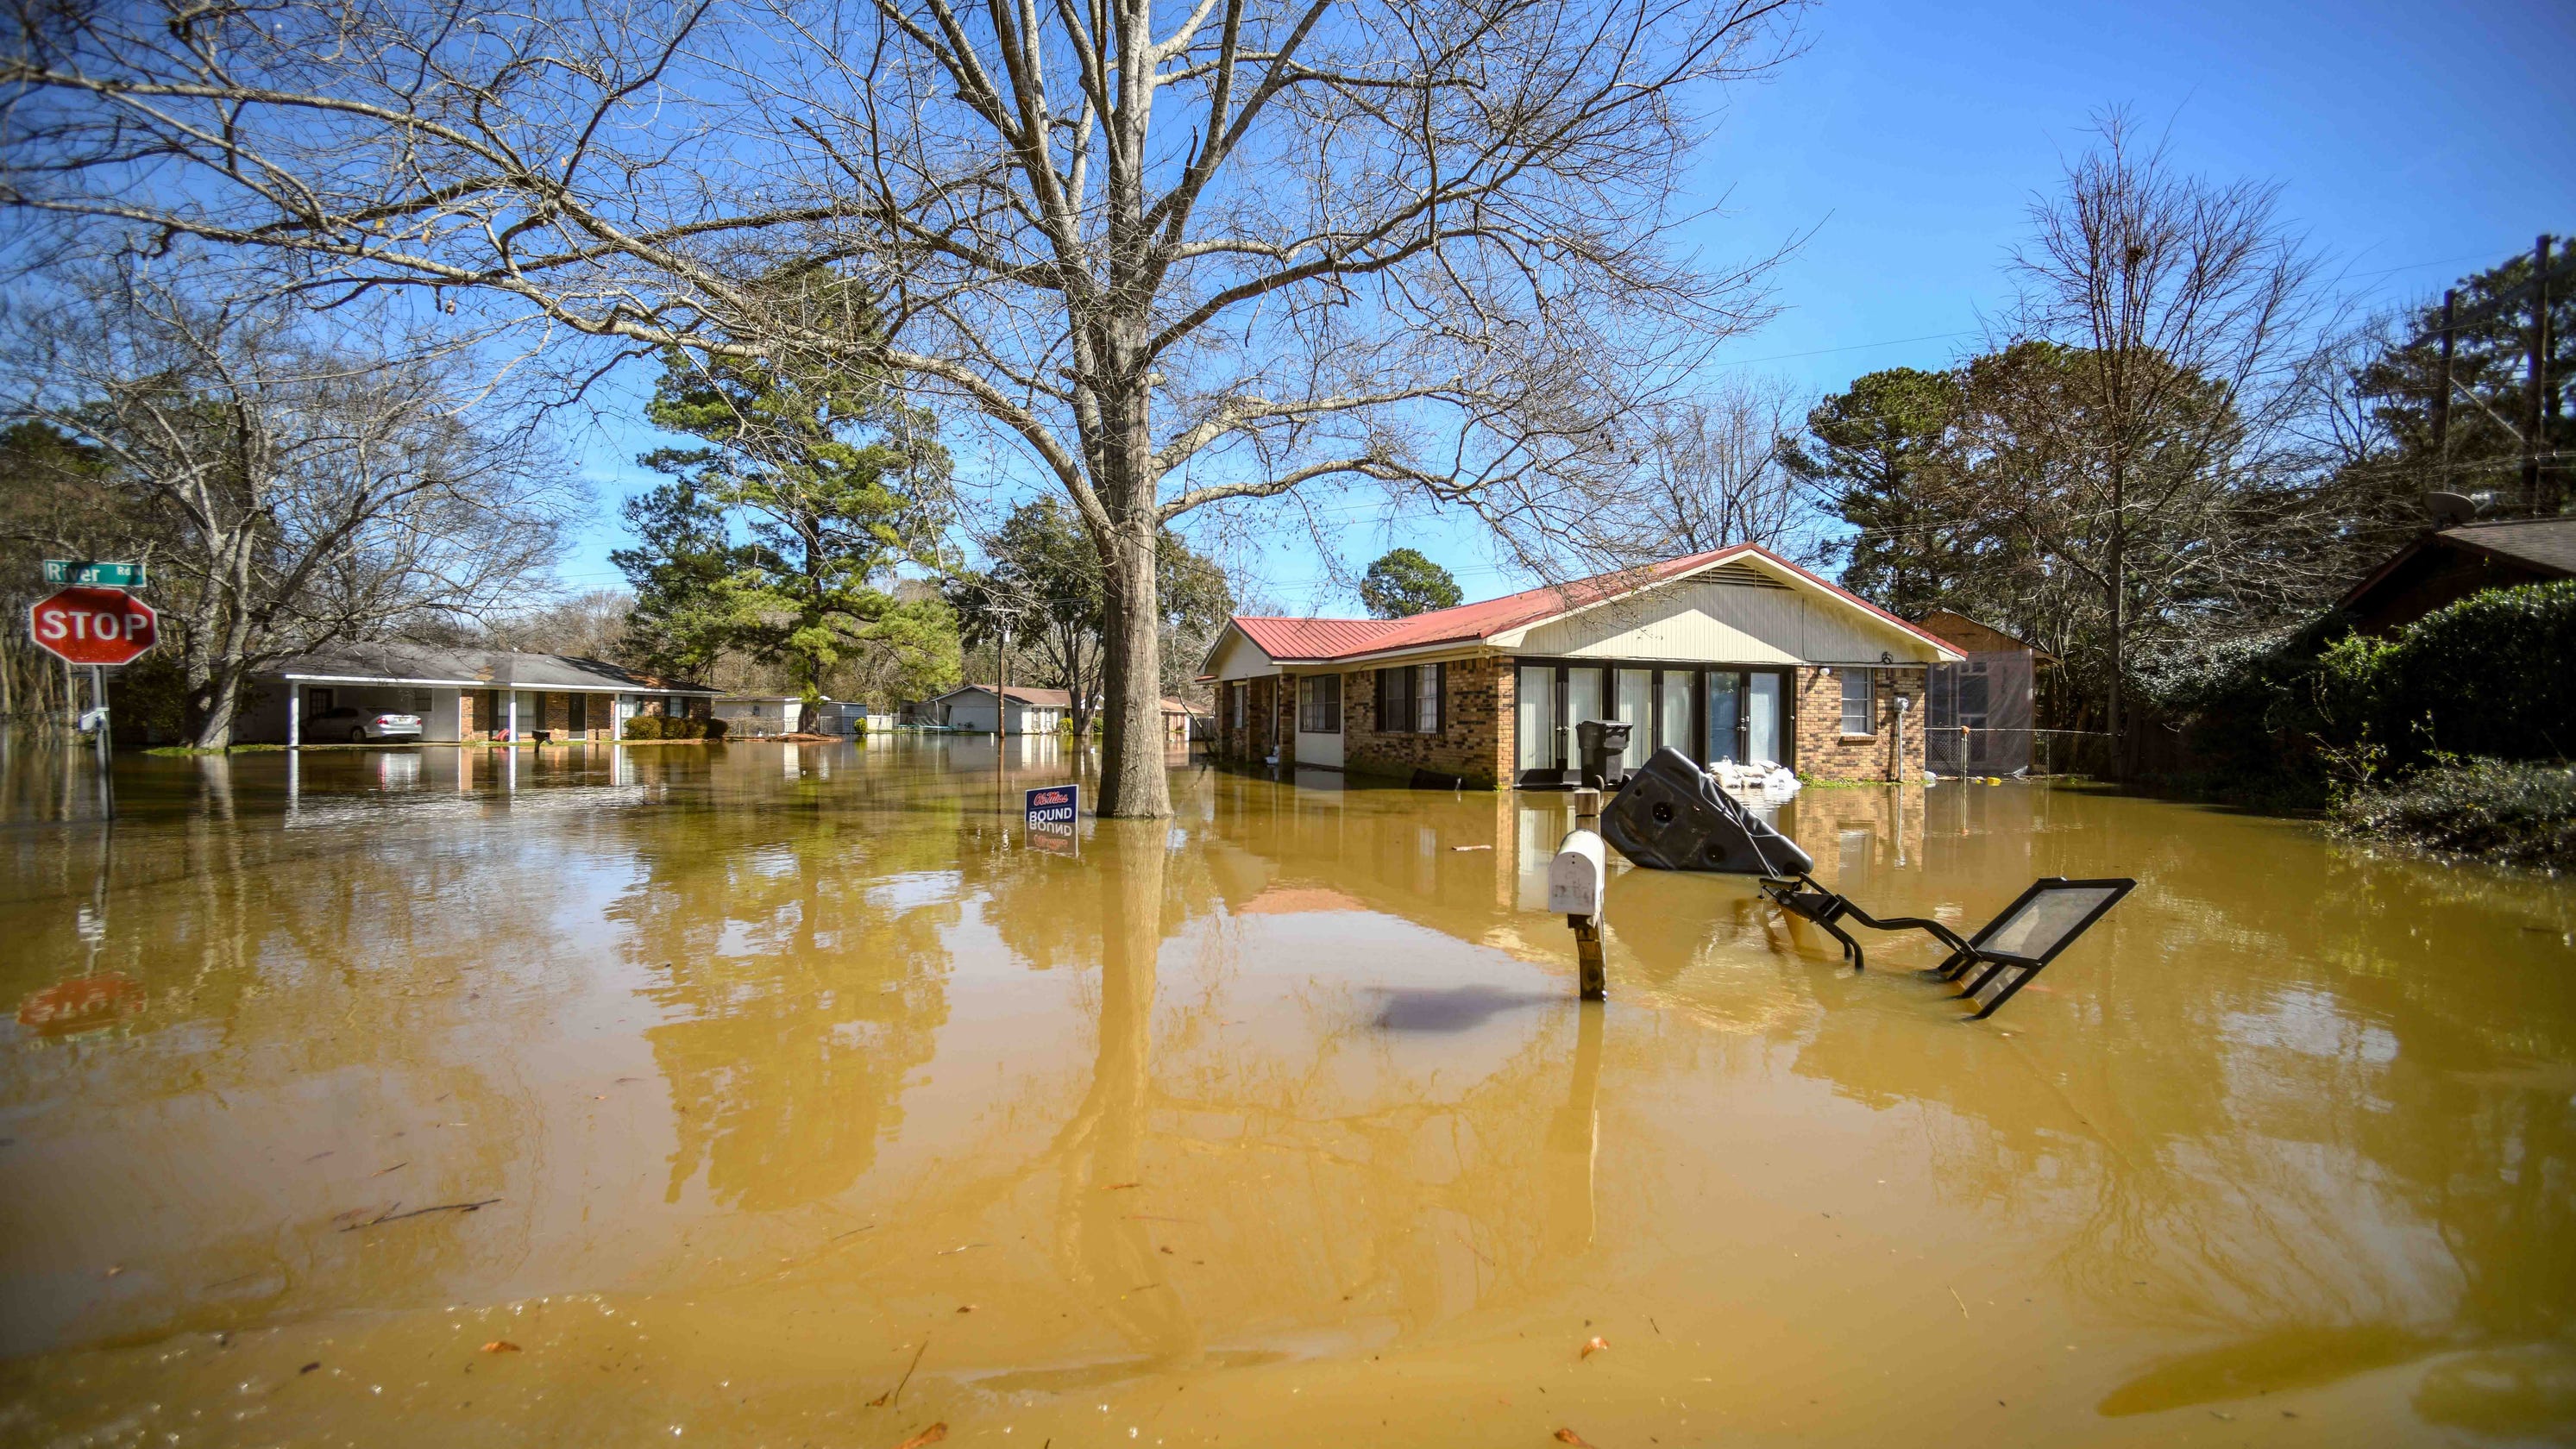 ms-flooding-how-to-report-damage-get-insurance-questions-answered